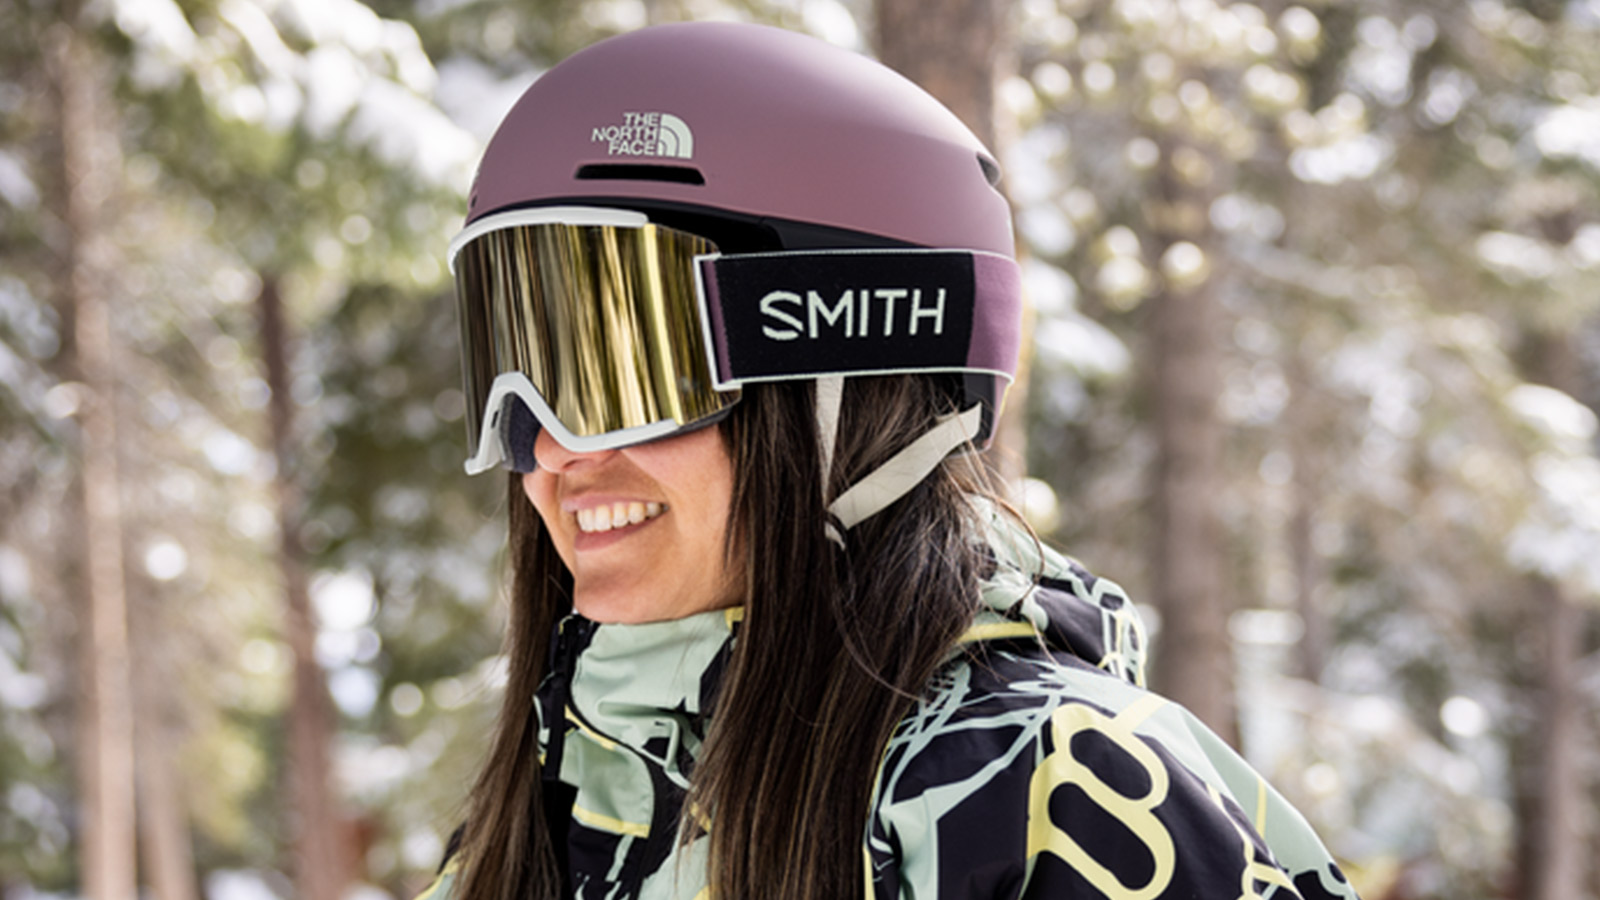 Smith x The North Face Snow Helmet Code Mips